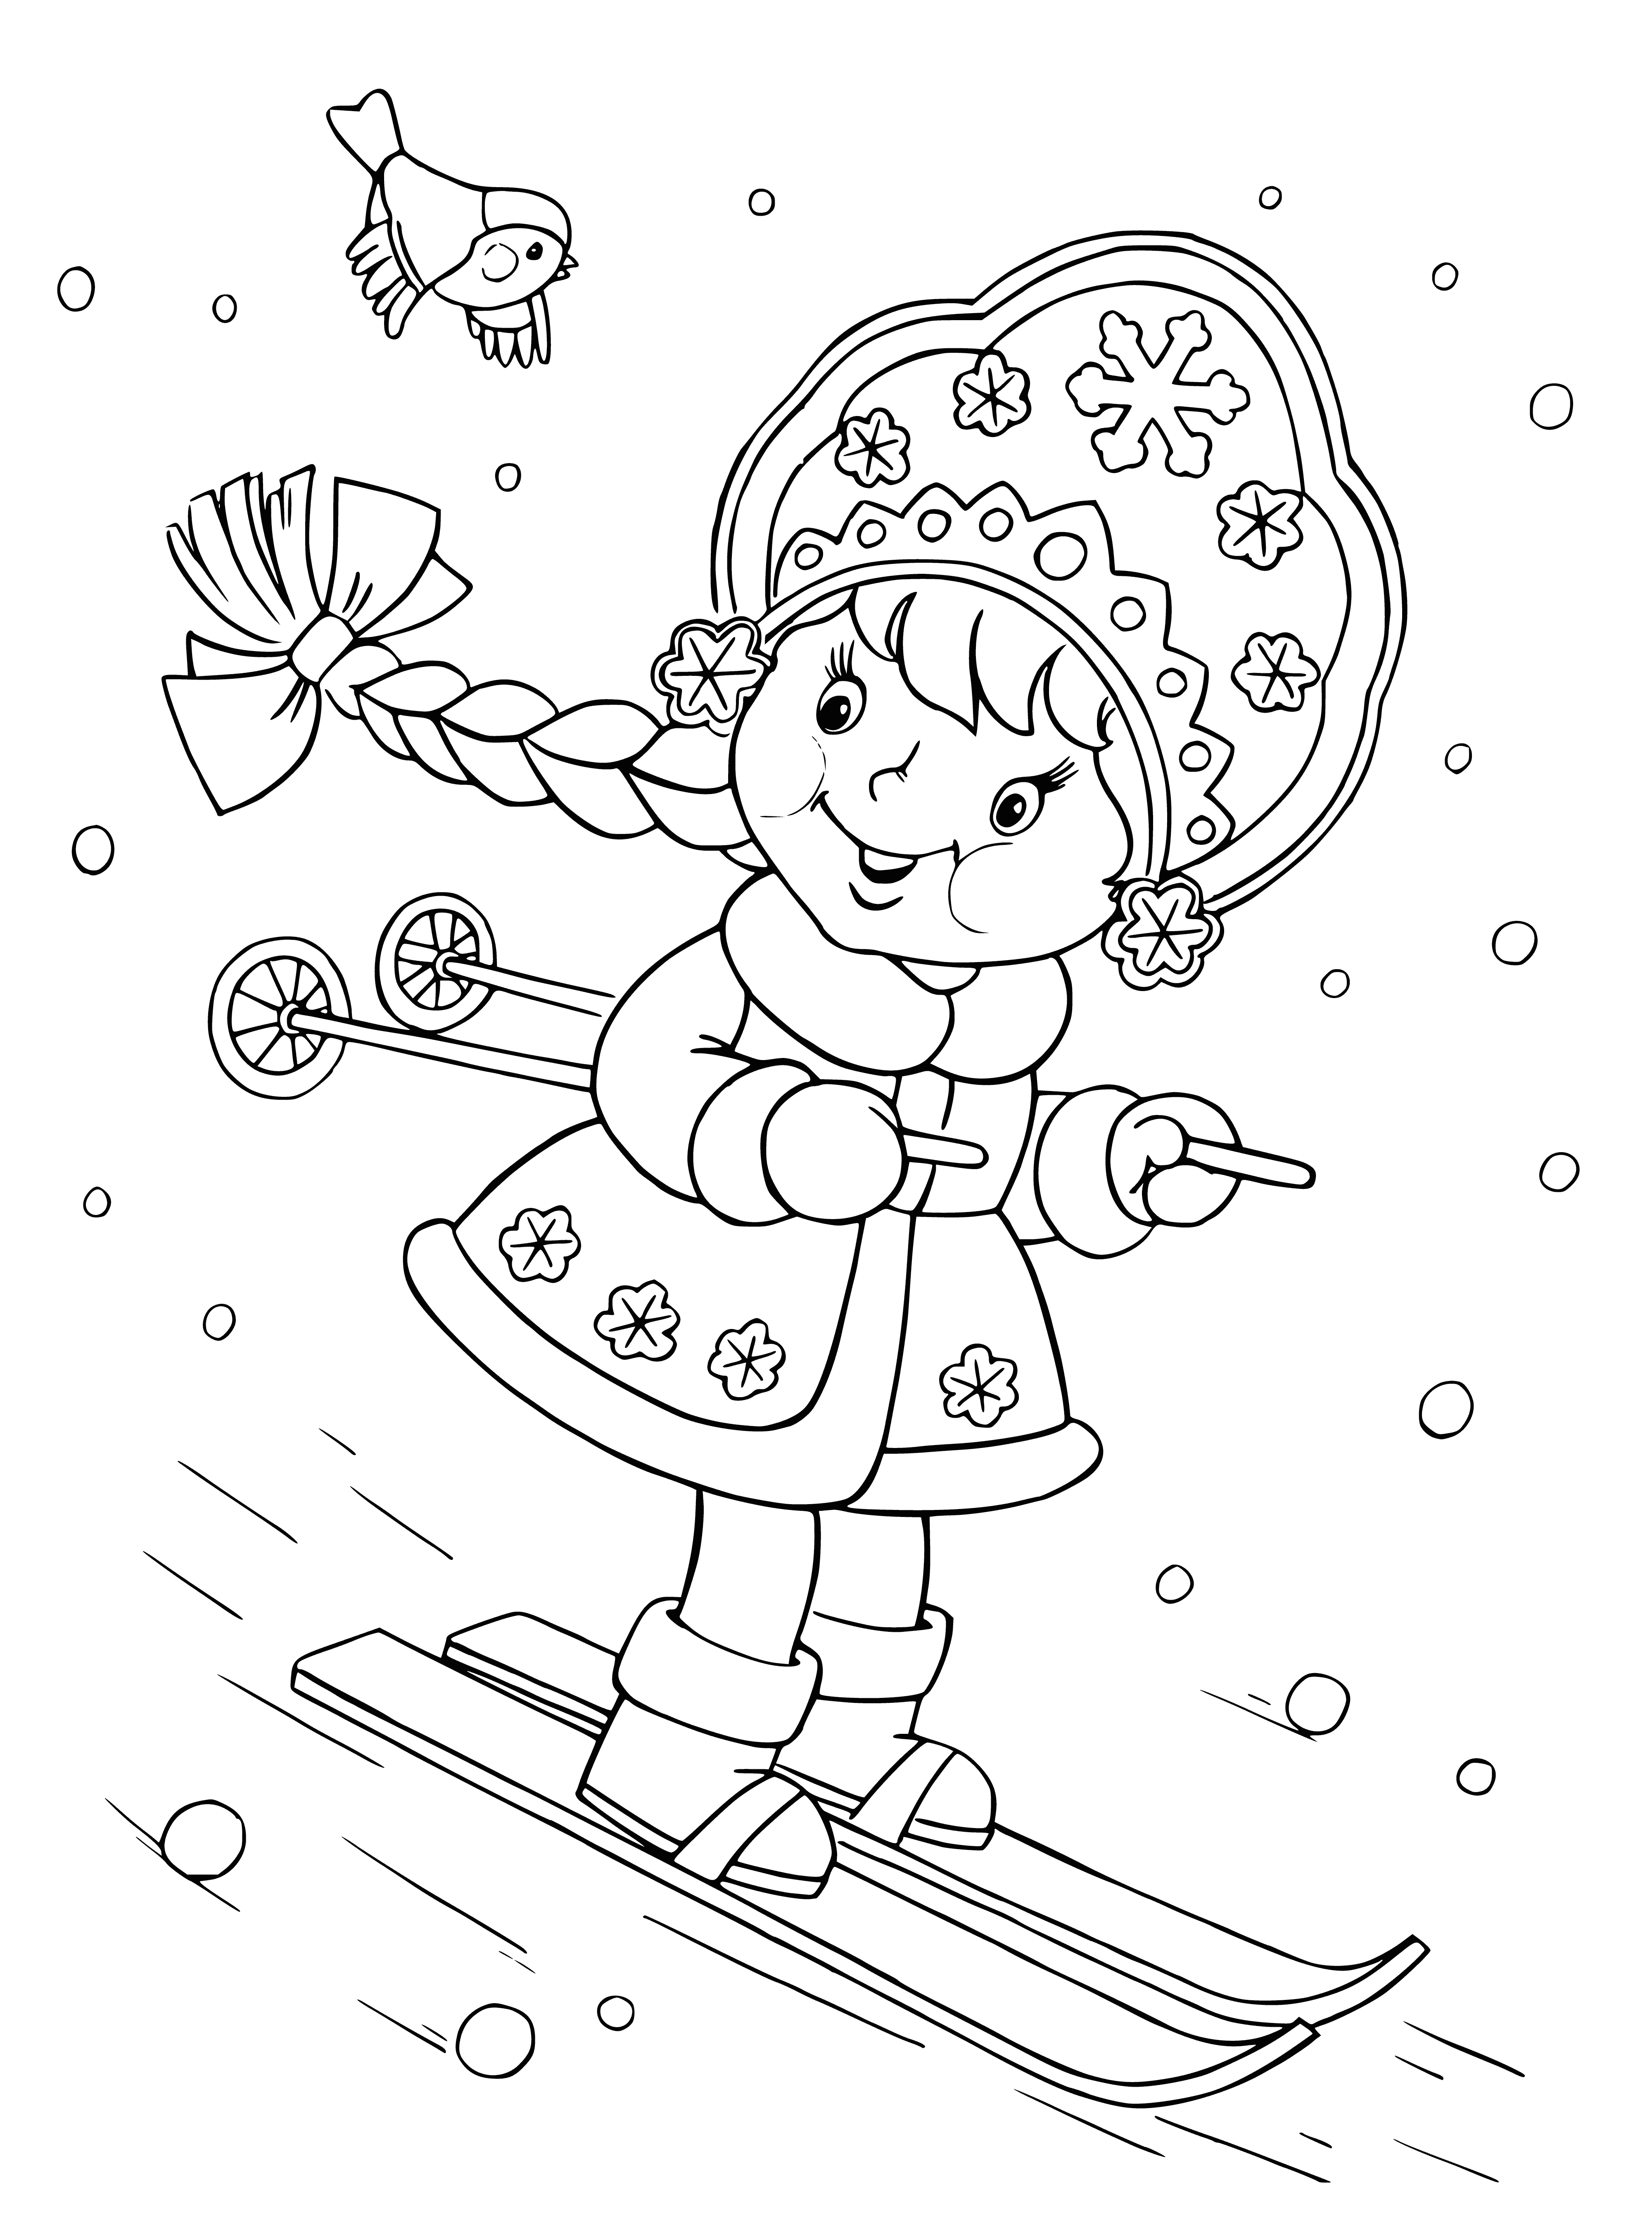 coloring page: Russian woman skier wearing traditional costume and red scarf, holding wooden staff and skiing on birch bark skis.